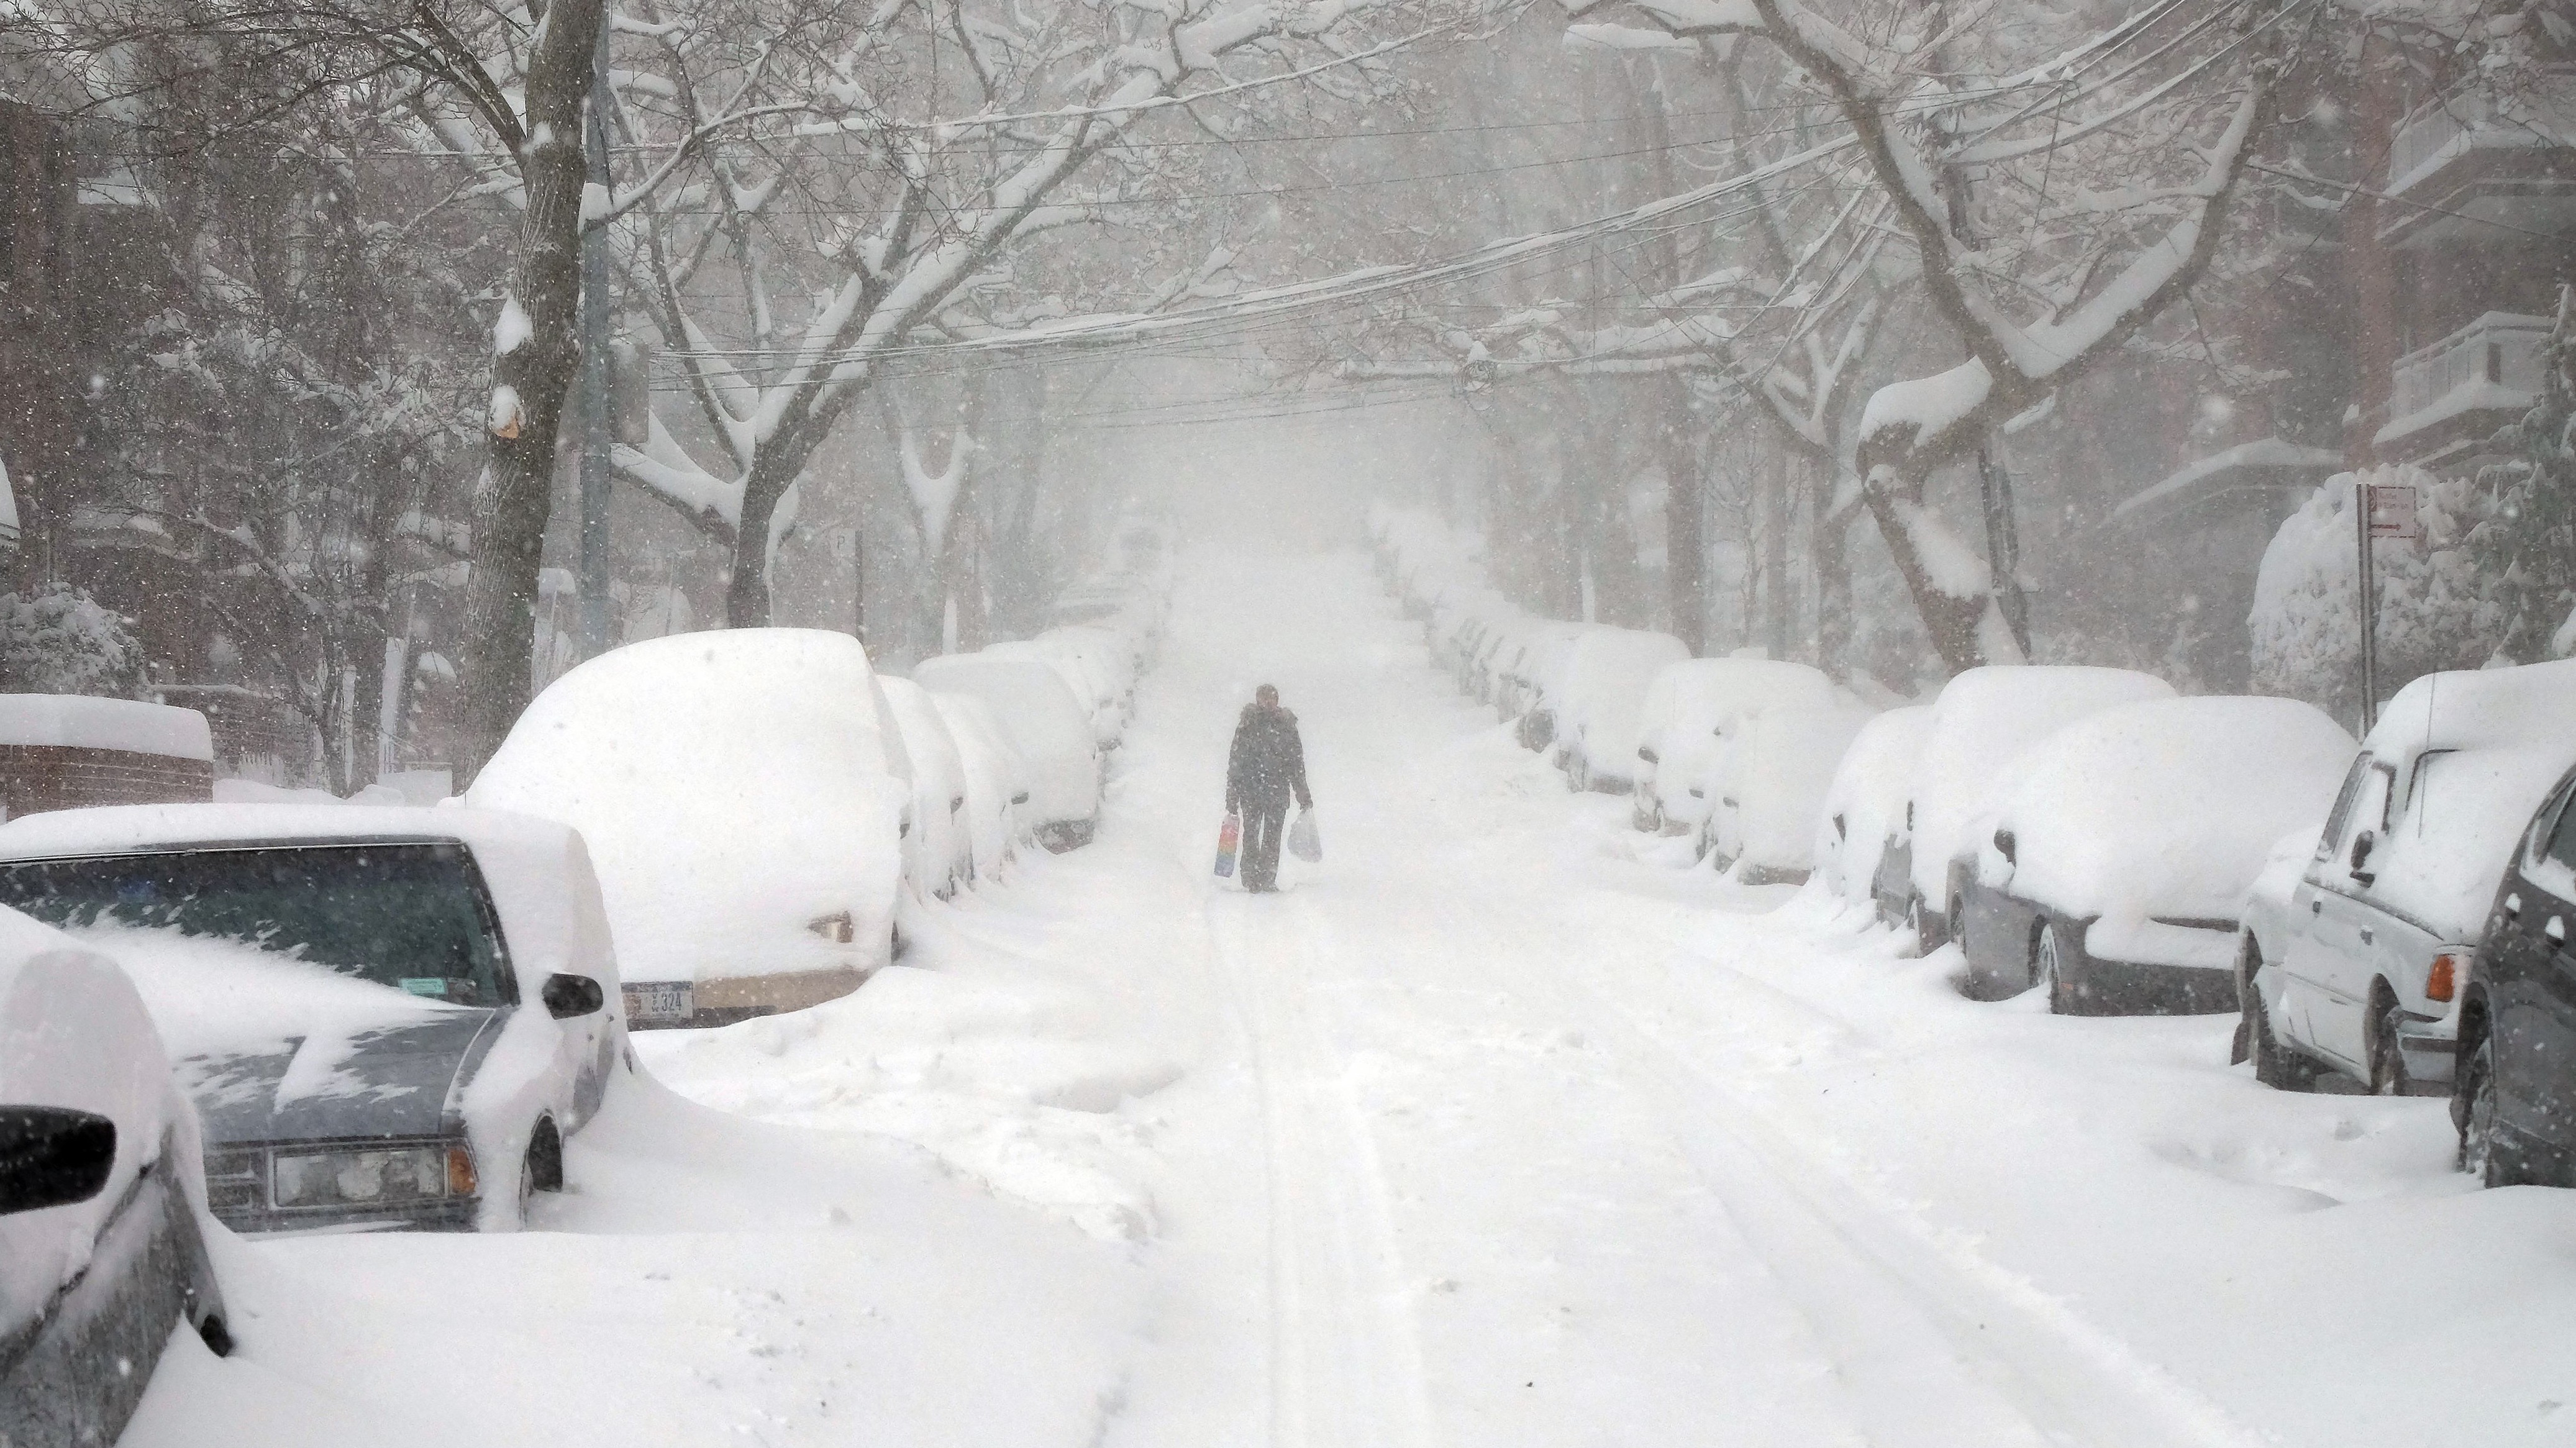 New York 2016 Blizzard Travel Ban: When Does It Start & End?